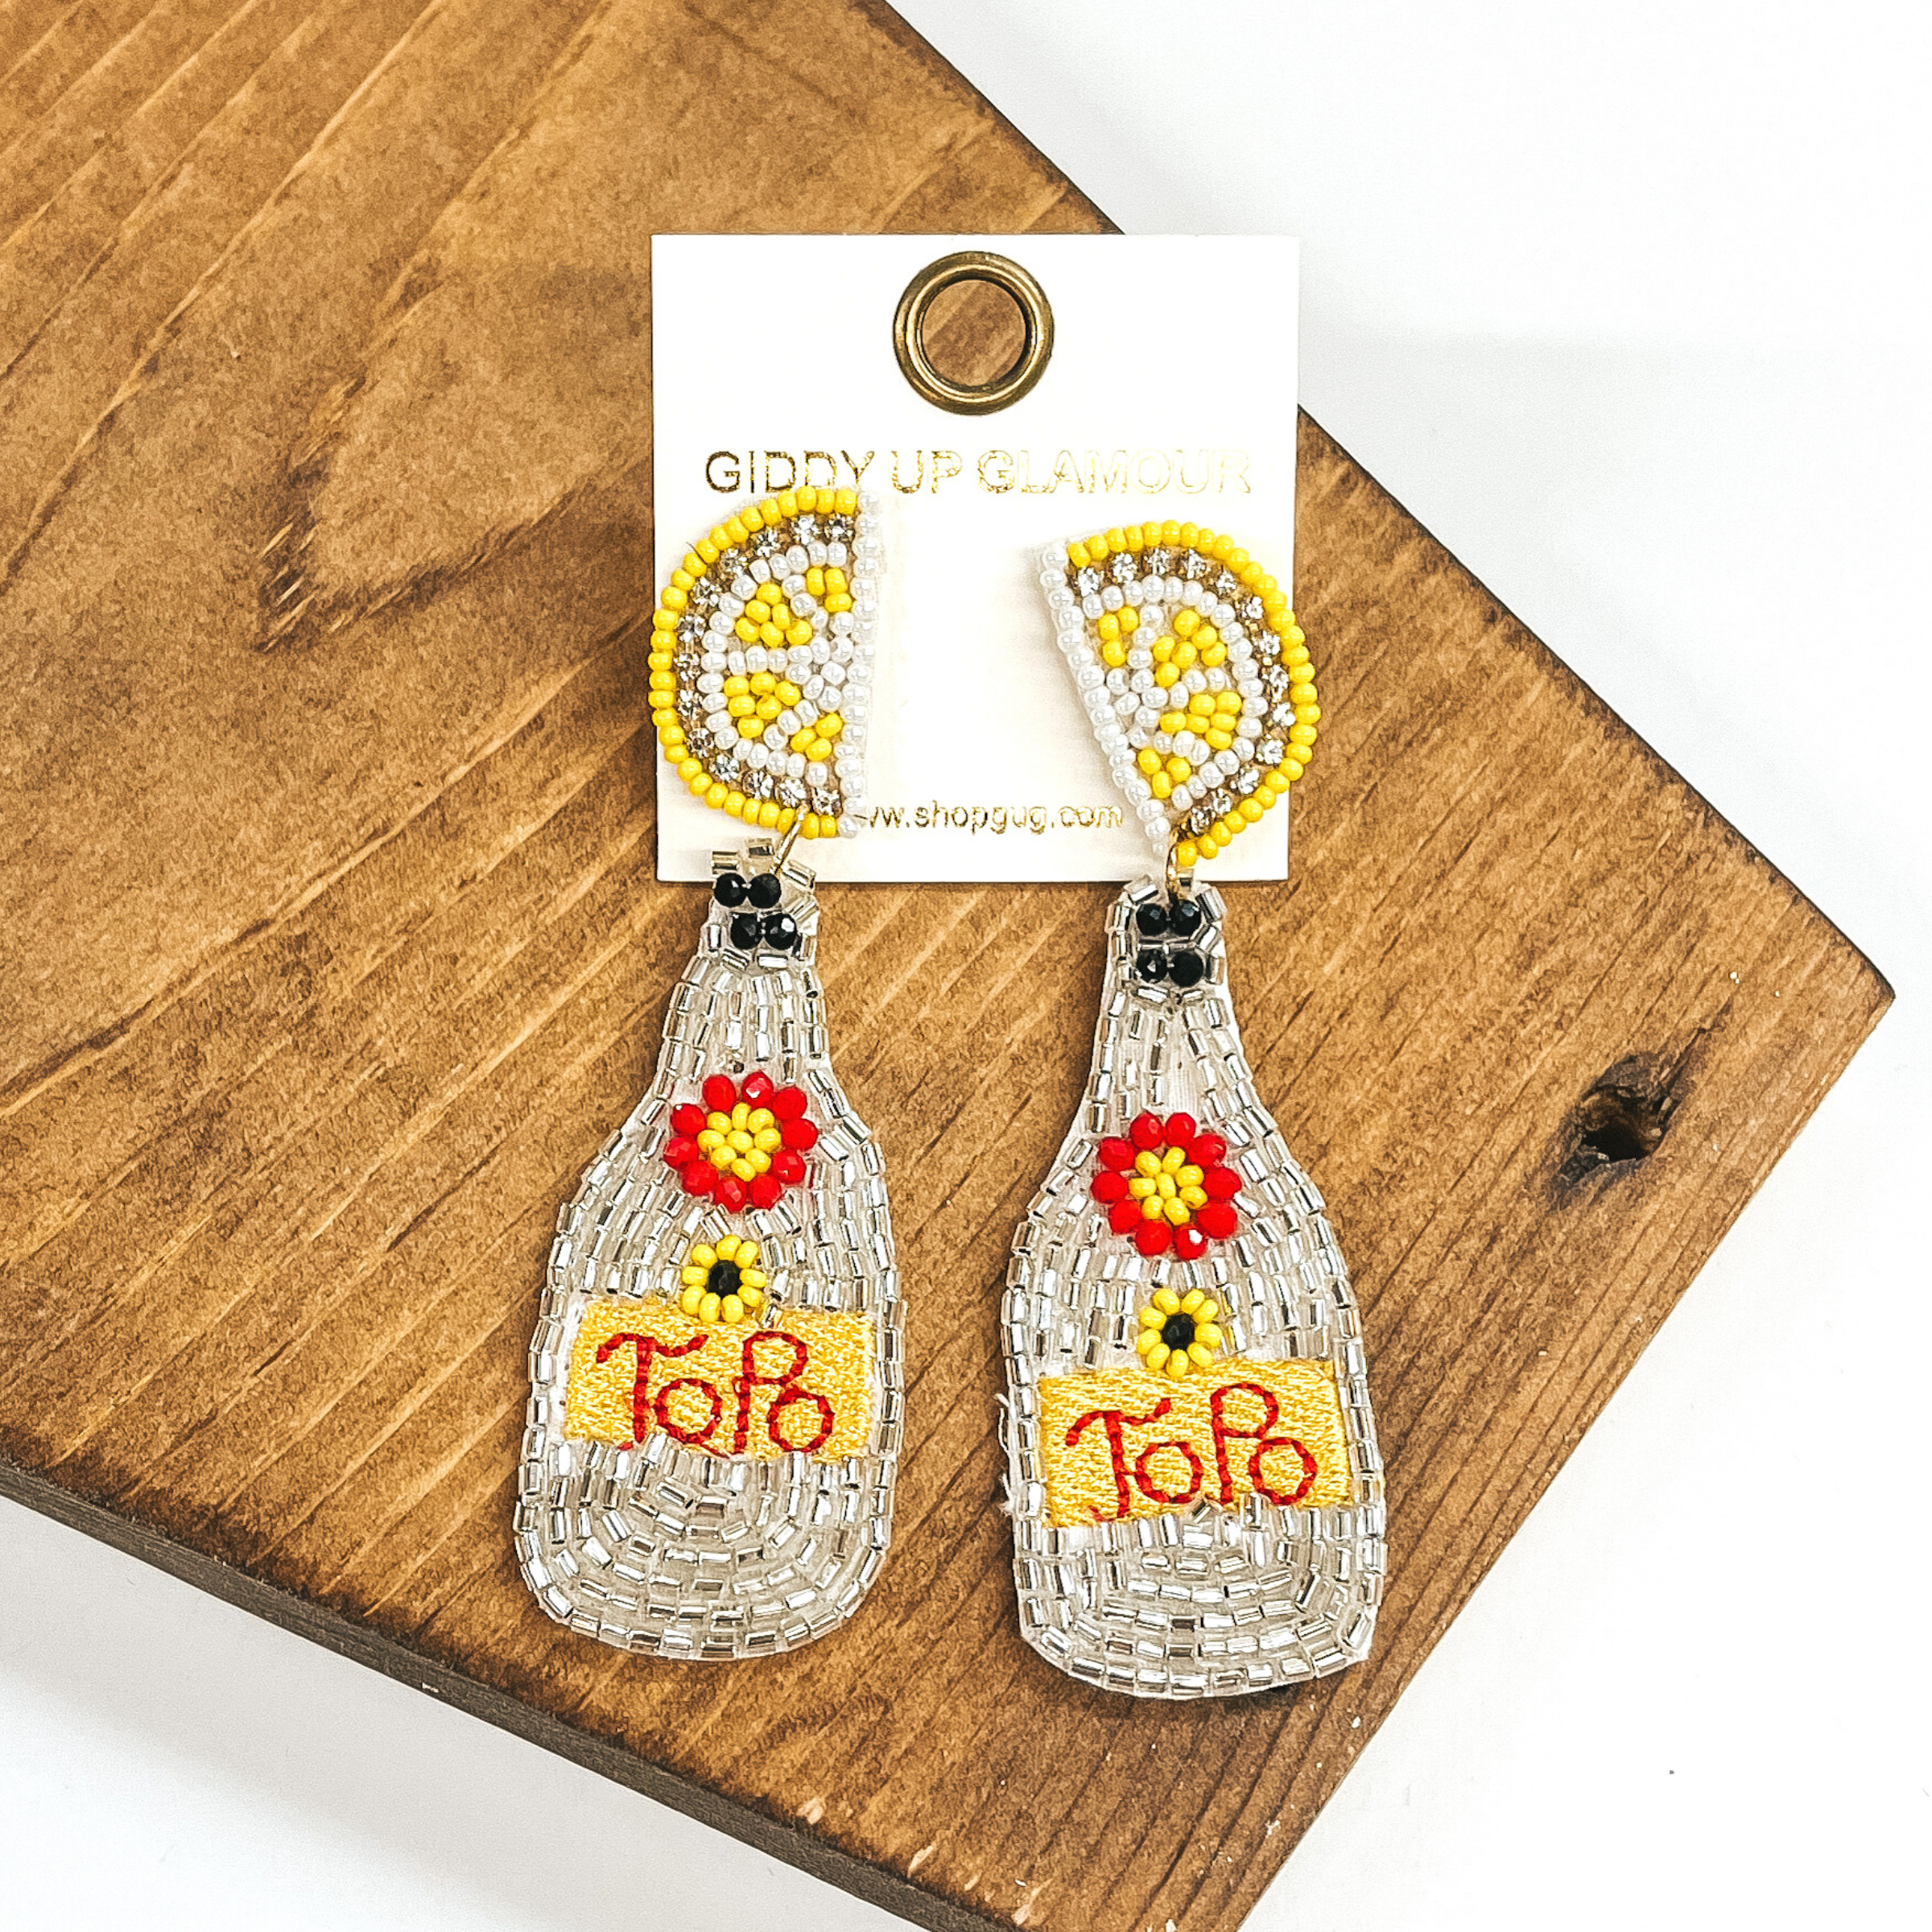 Beaded lemon stud earrings with a hanging bottle pendant. The bottle pendant is covered in clear crystals with a red and yellow beaded flower. It also includes a yellow stitched area that has the word "ToPo" stitched in red. These earrings are pictured on a dark brown object on a white background.